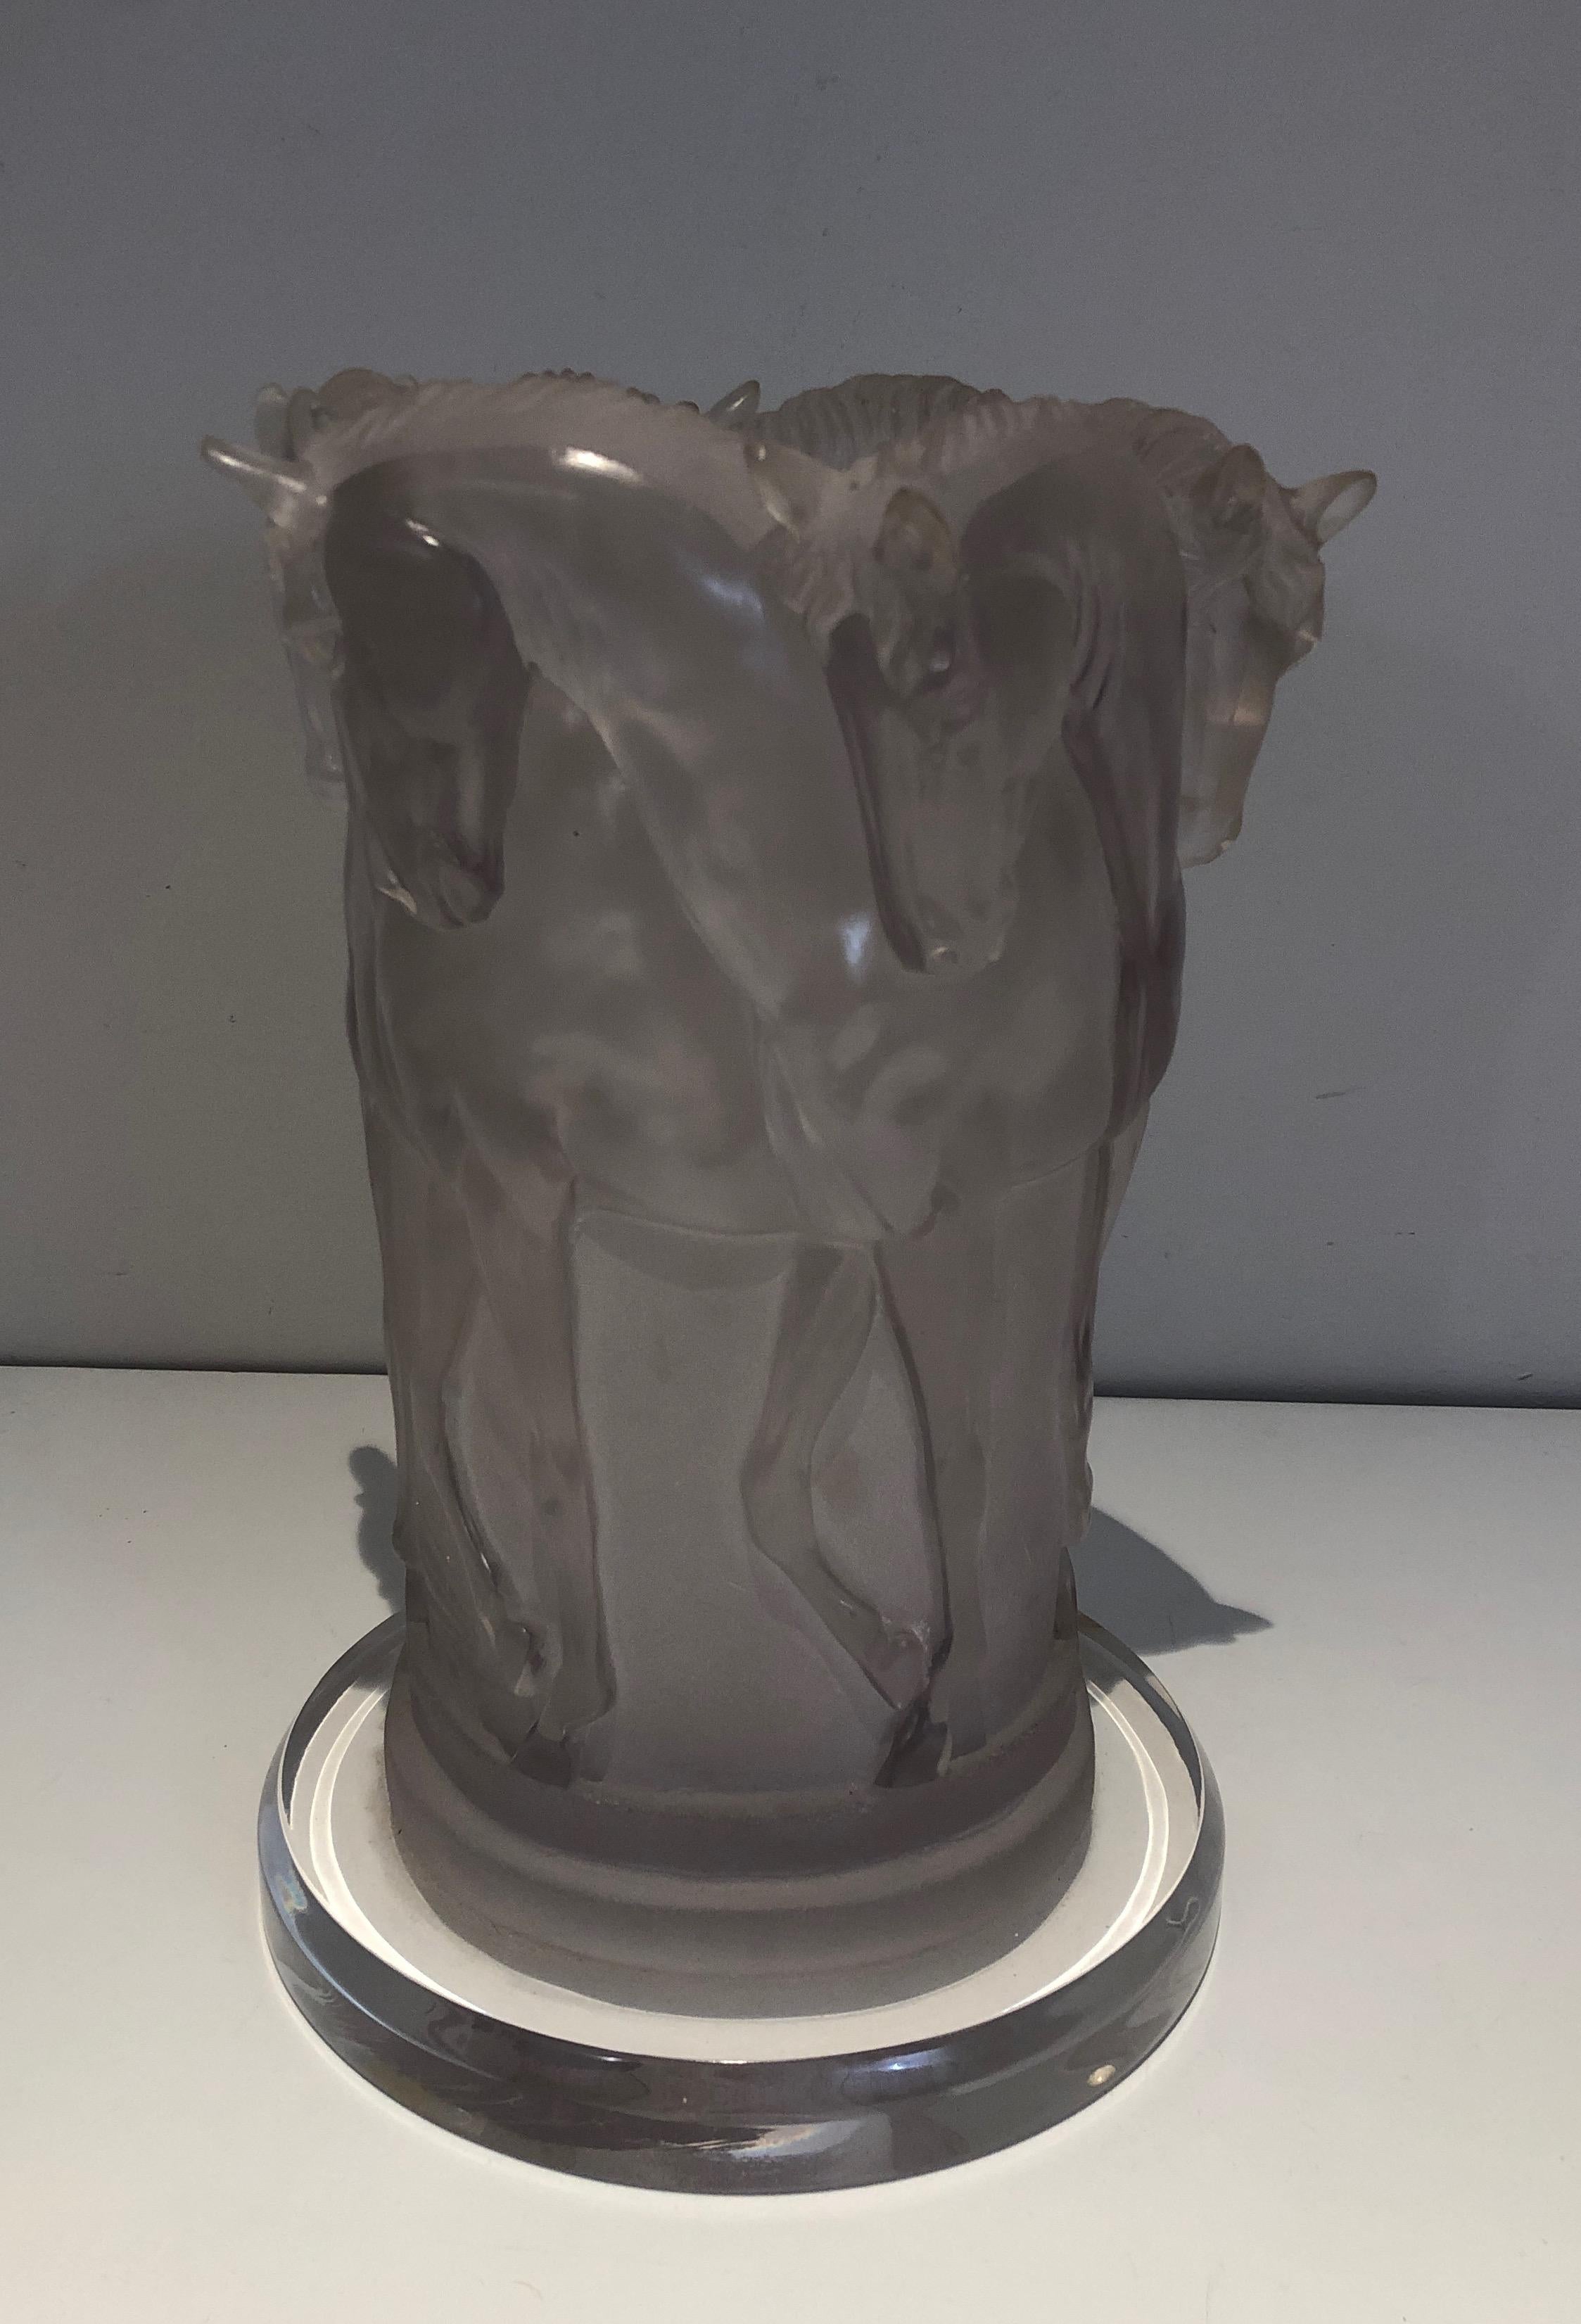 Lucite Horses Table Lamp, French Work, in the Style of Maison Lalique, 1970's For Sale 6